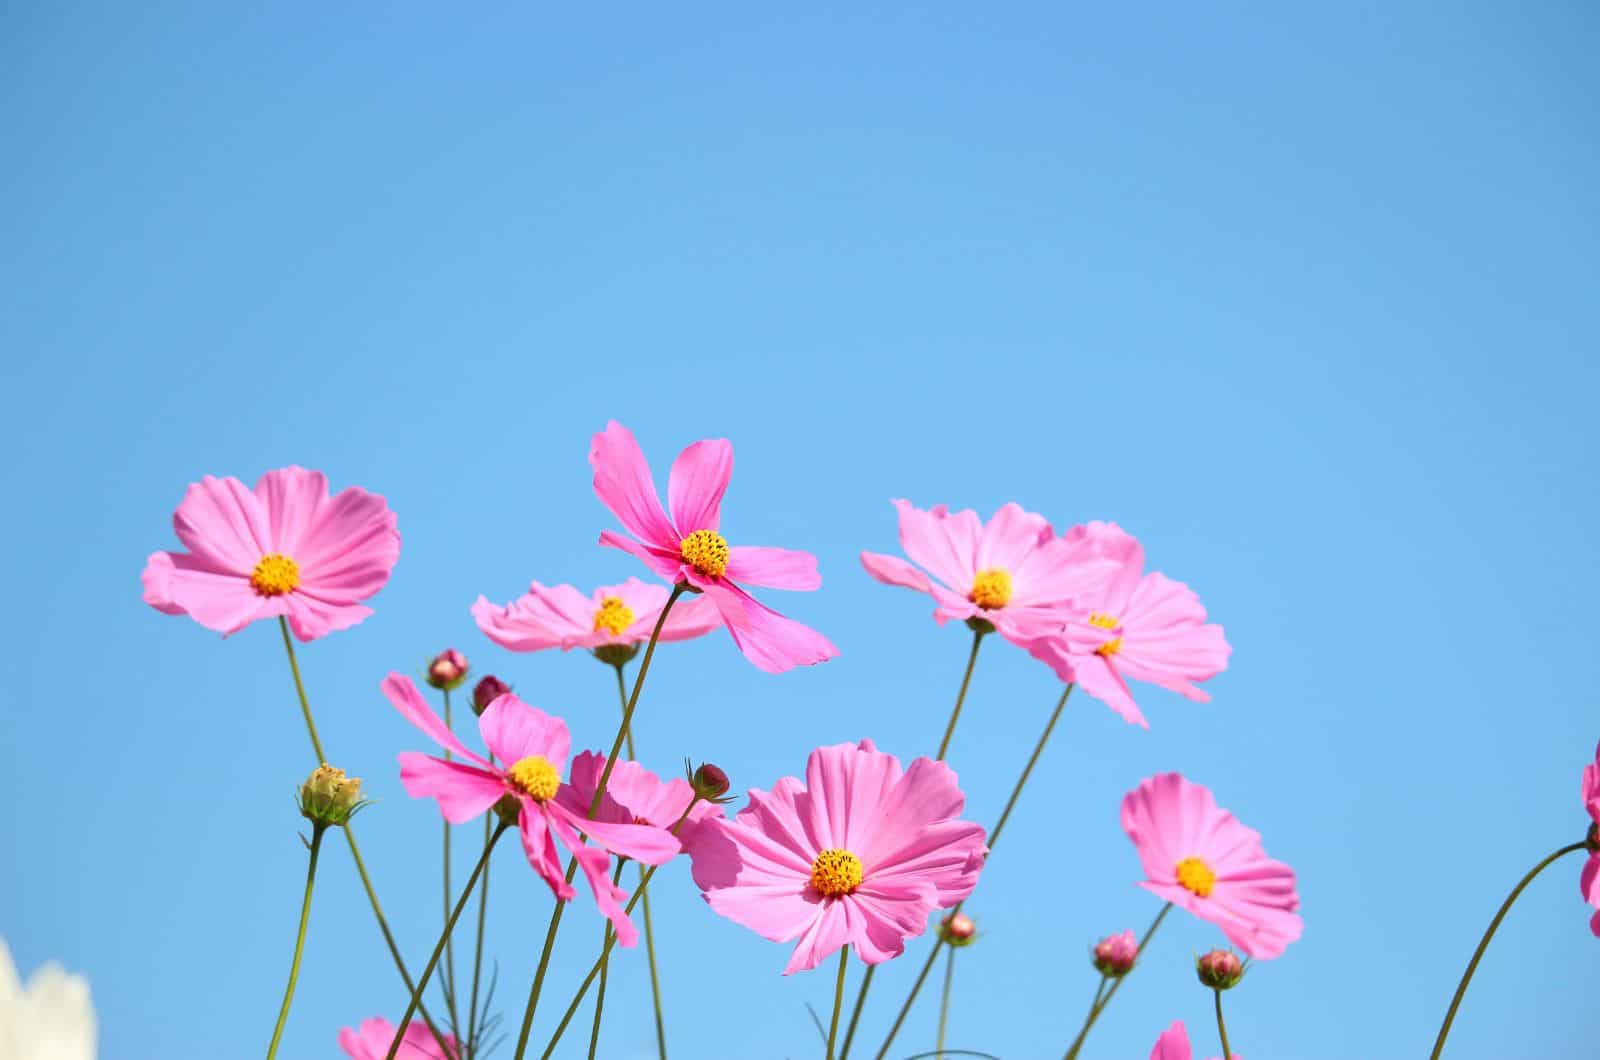 Cosmos Flowers and sky